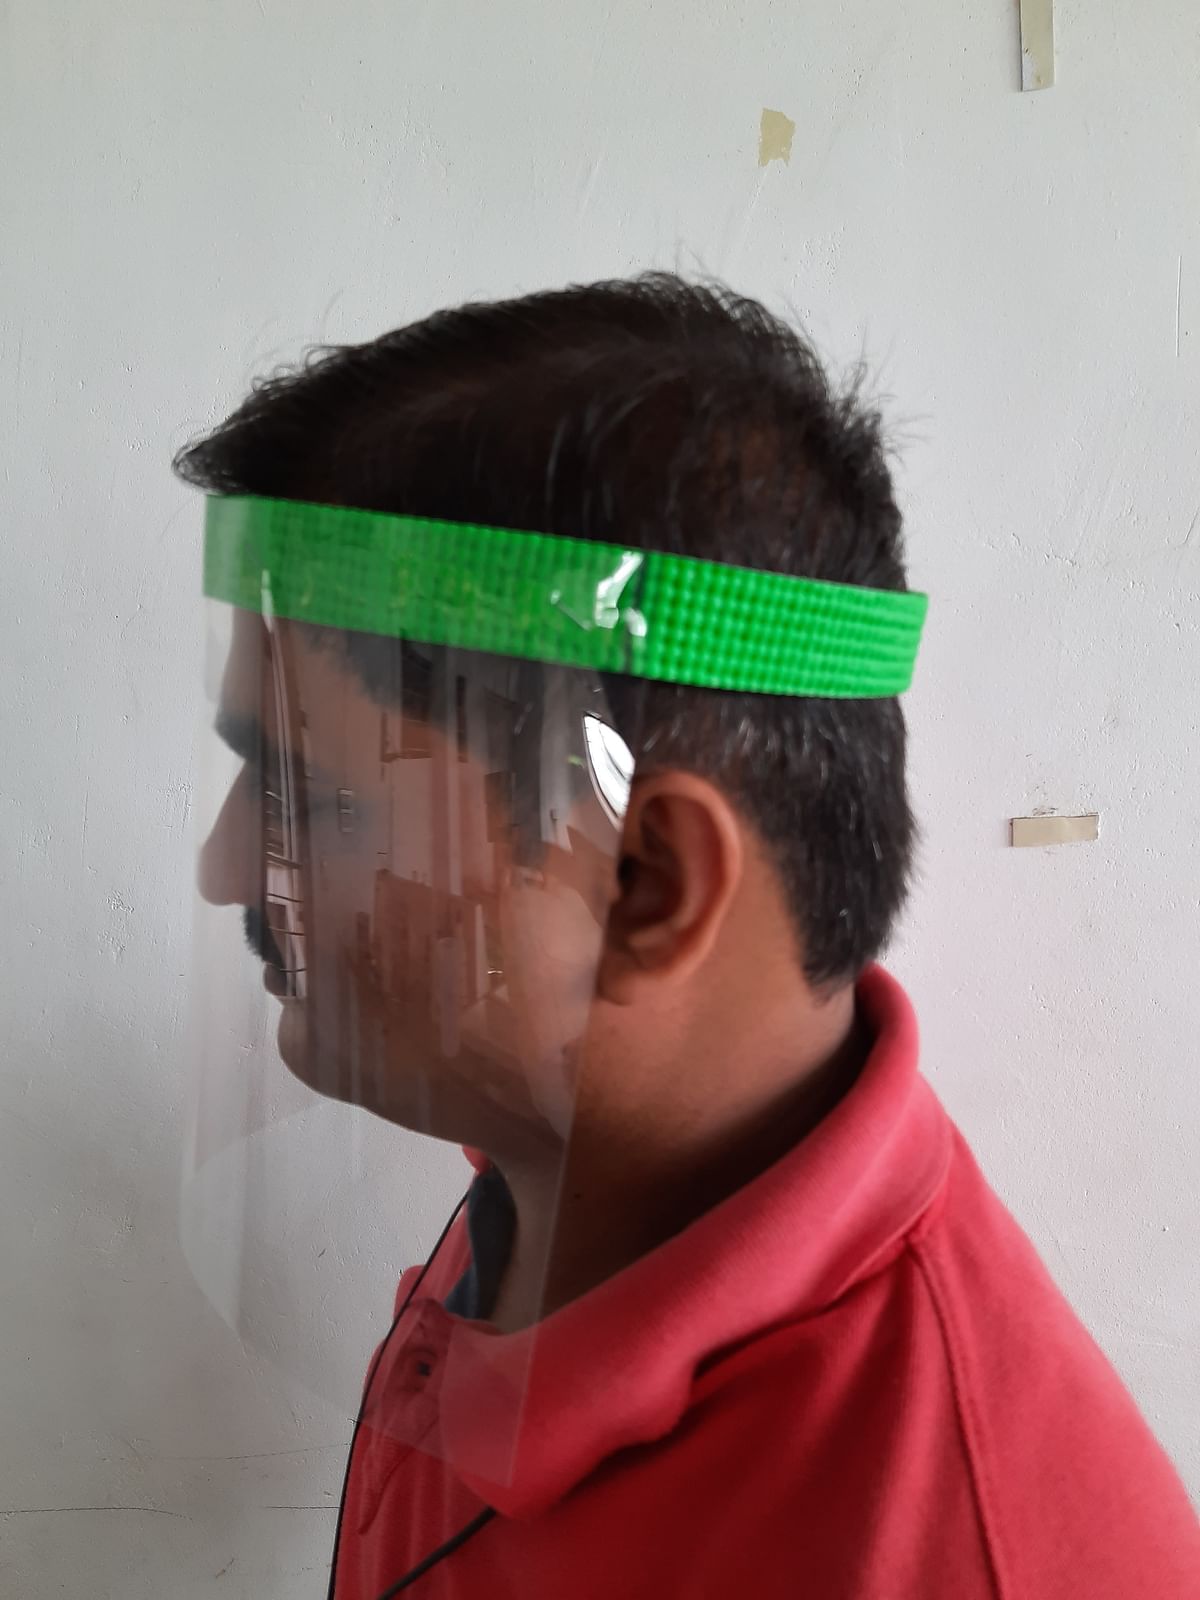 NITK startup manufactures nanoparticle-coated faceshields